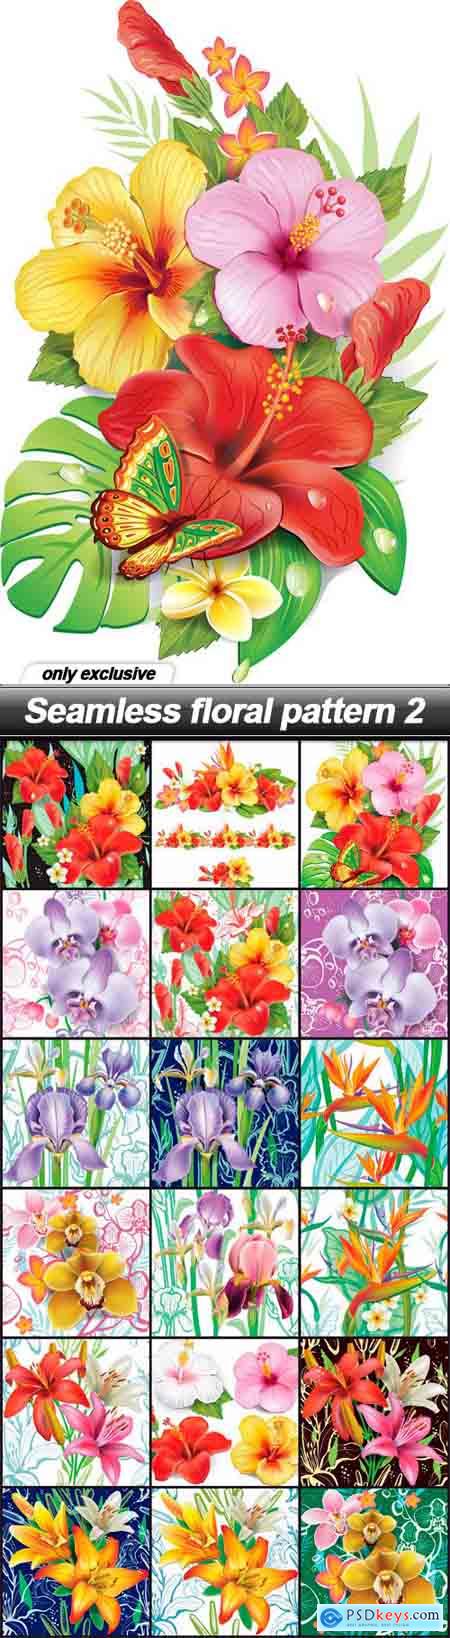 Seamless floral pattern 2 - 18 EPS